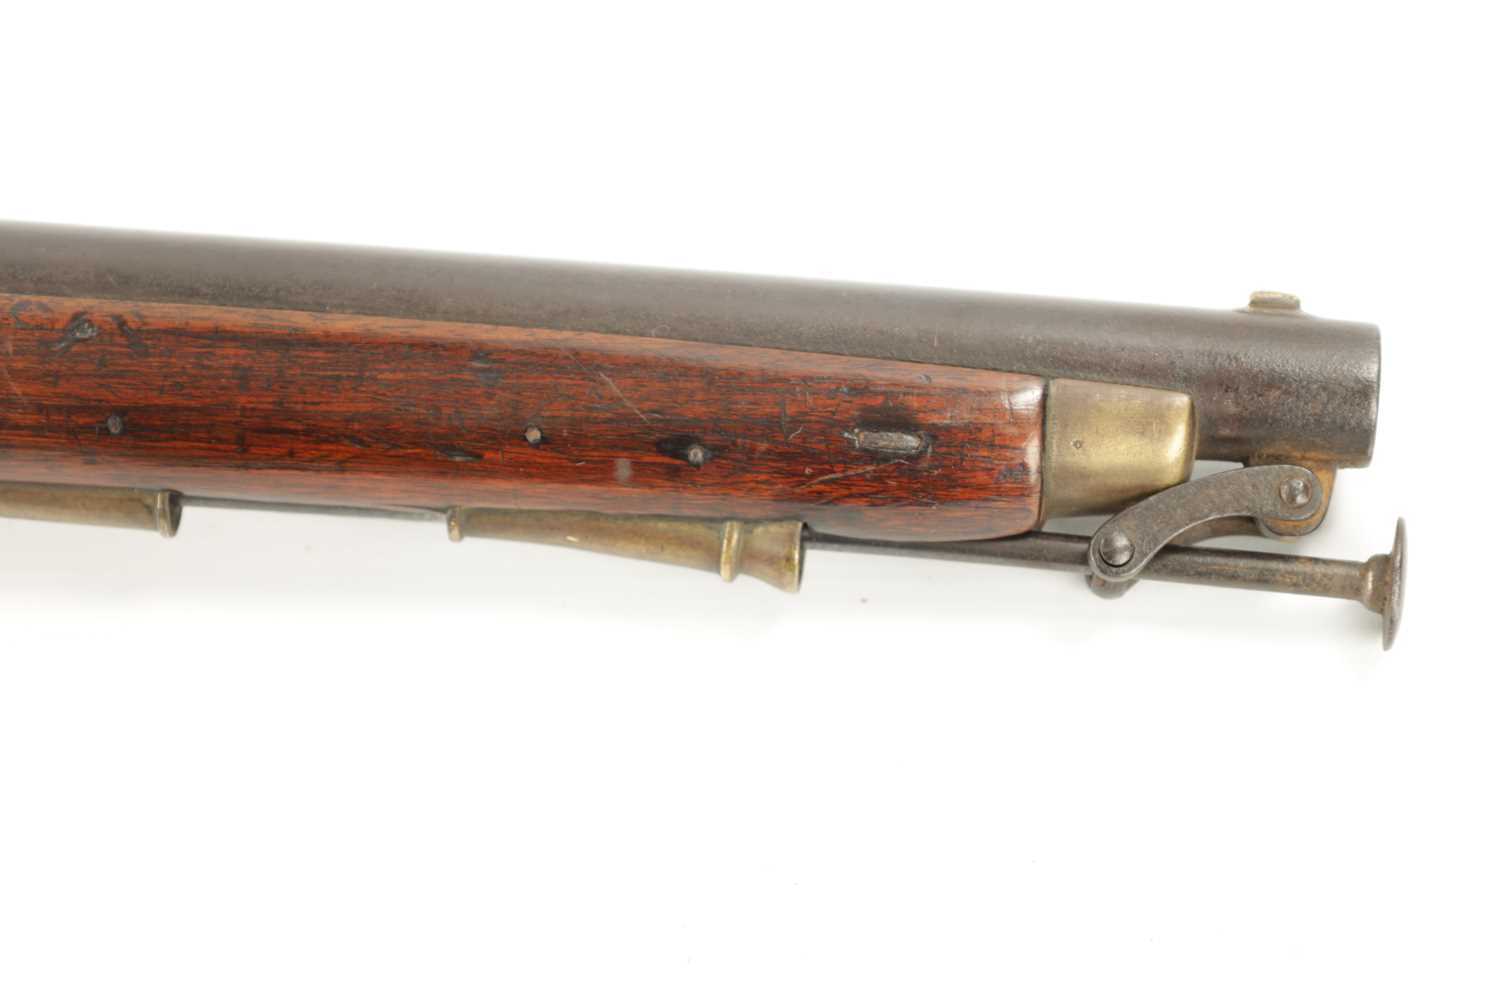 A BRITISH HEAVY CAVALRY FLINTLOCK CARBINE BY TOWER - Image 5 of 13